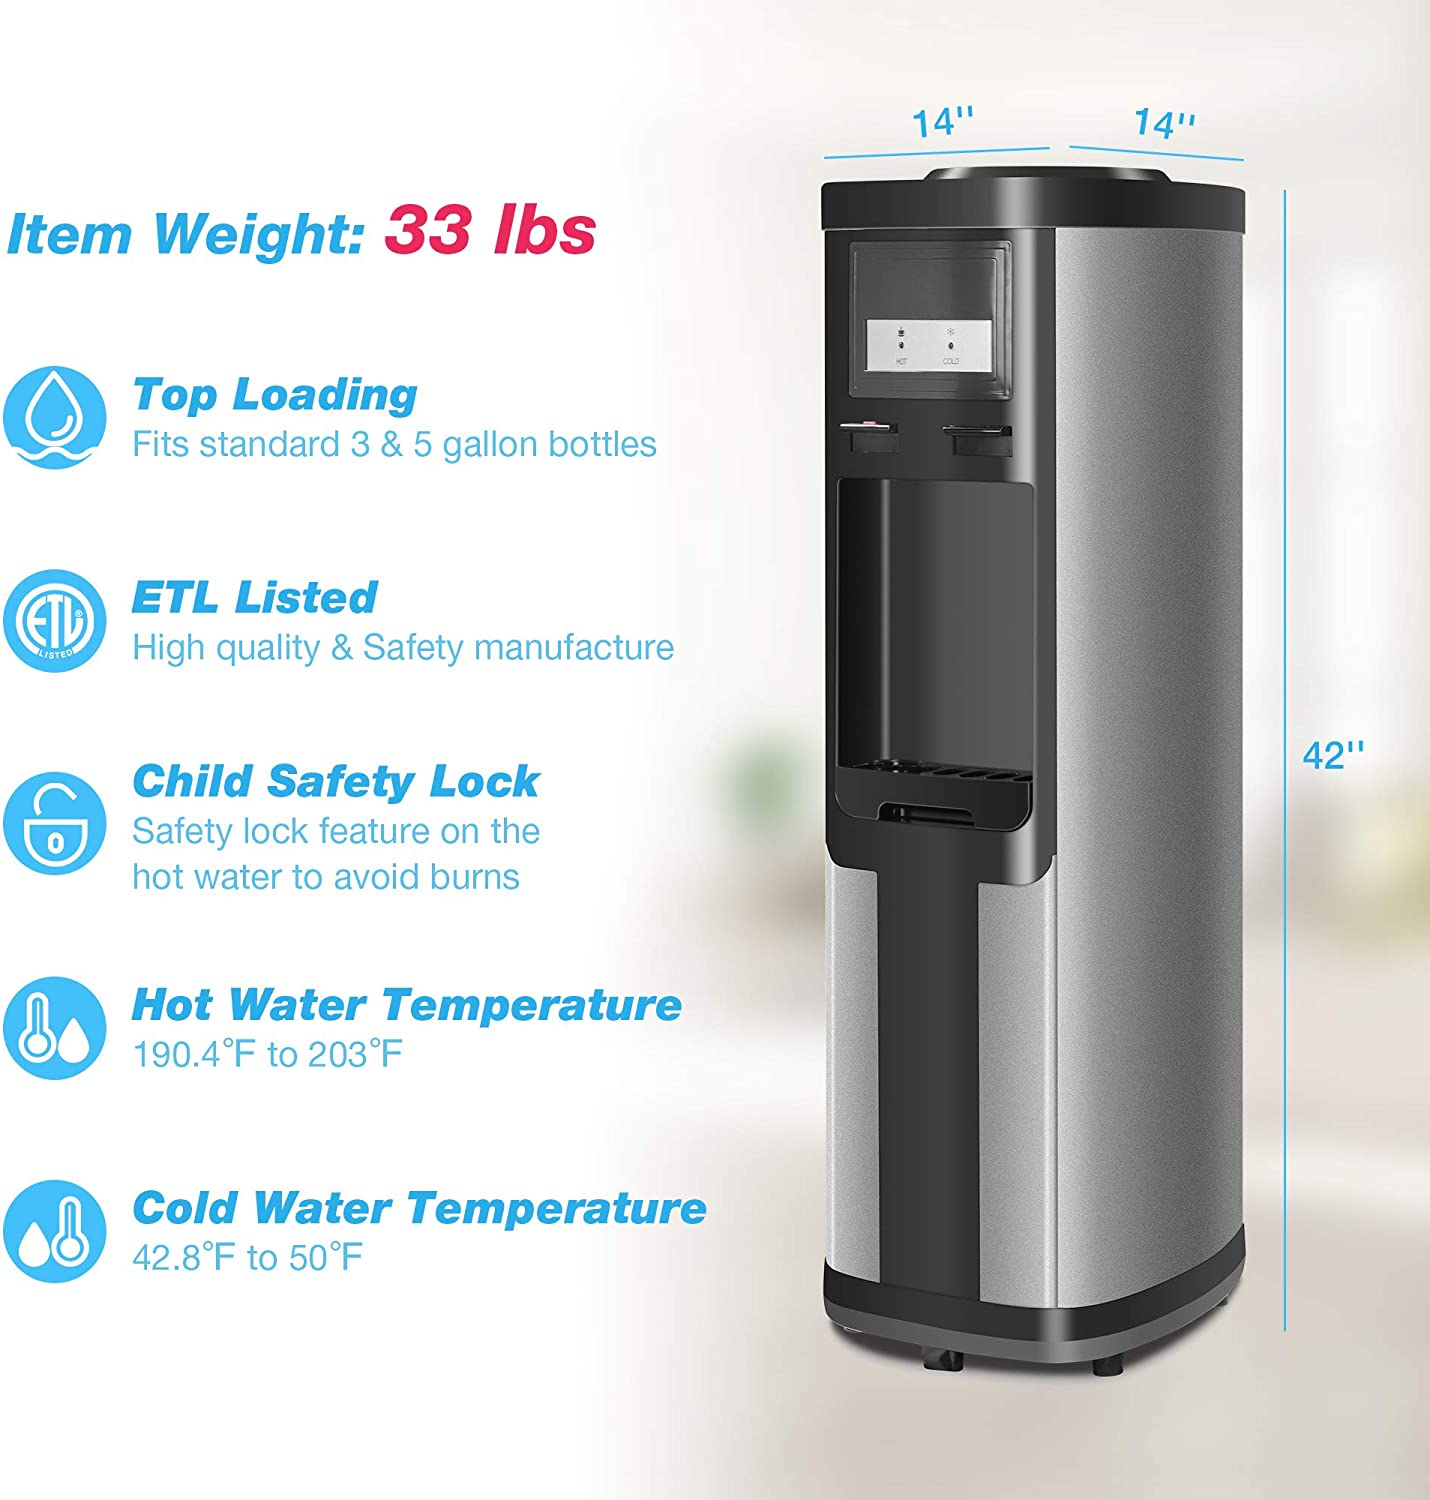 3-5 Gallon Top Loading Water Dispenser Cooler Hot and Cold with Child Safety Lock, ETL Listed Quiet, Black